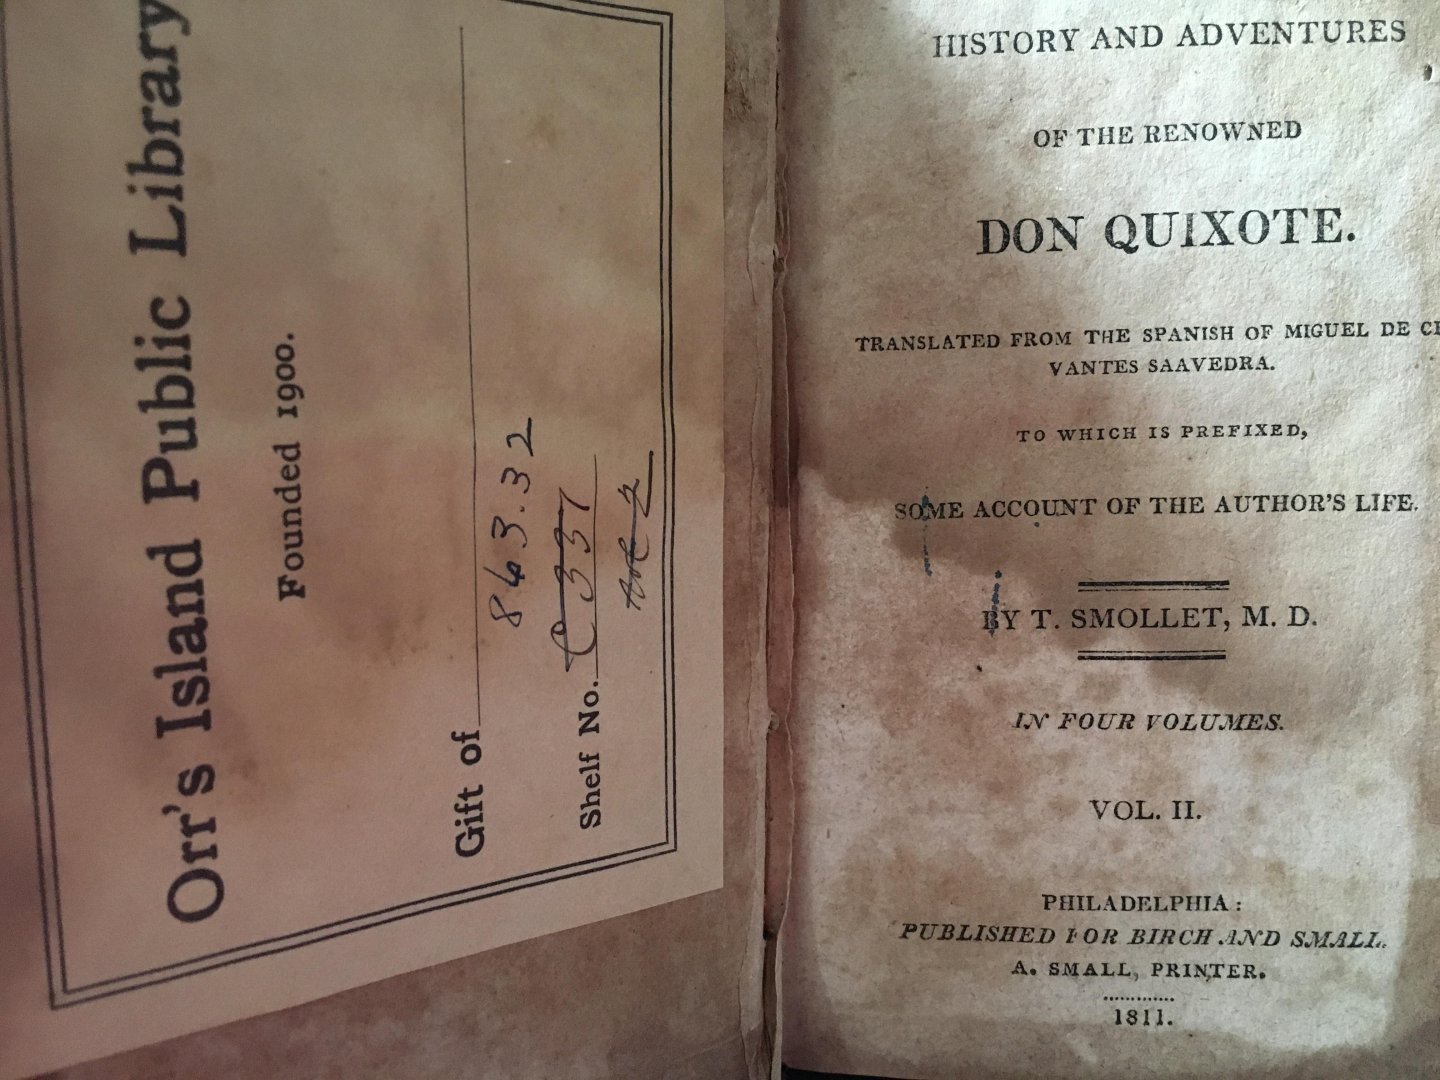 William Paterson, Tes Saavedra, Smollet - History And adventures of the reowned Don Quixote, Translated from the Spanish of Miguel de Cervantes Saavedra